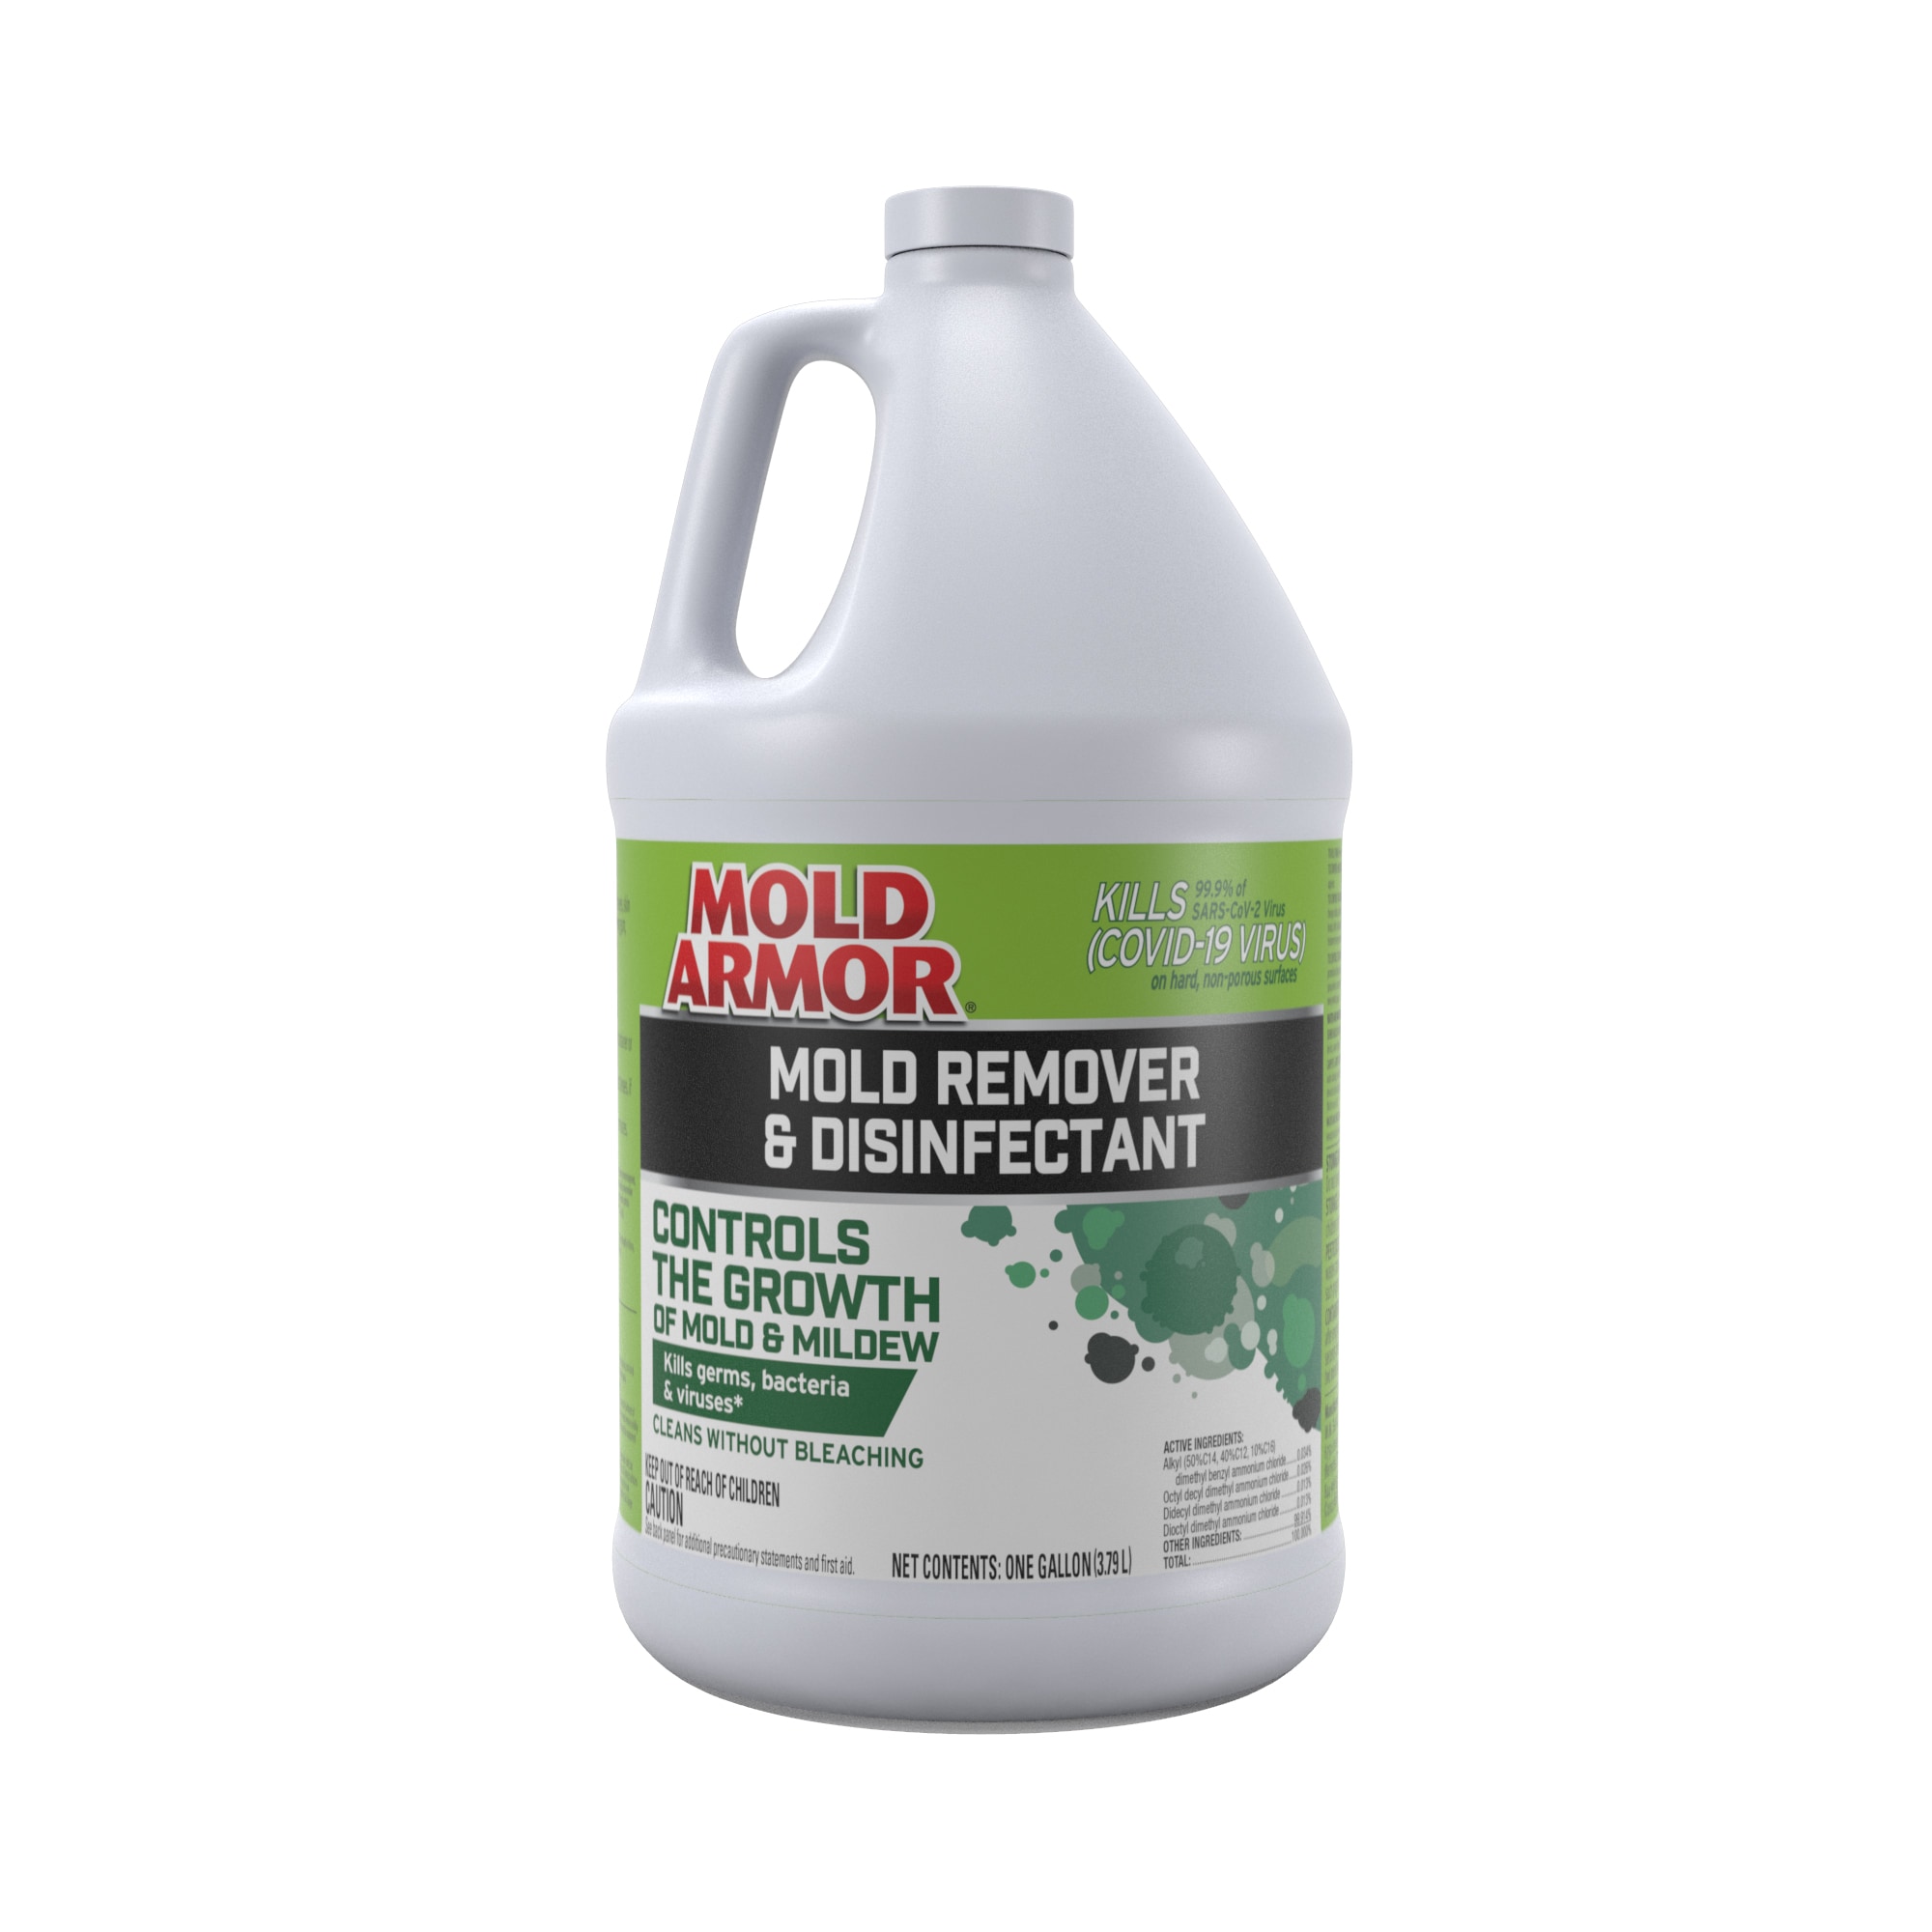 Mold Armor Mold Remover and Disinfectant Cleaner, 1 Gal. - Kills